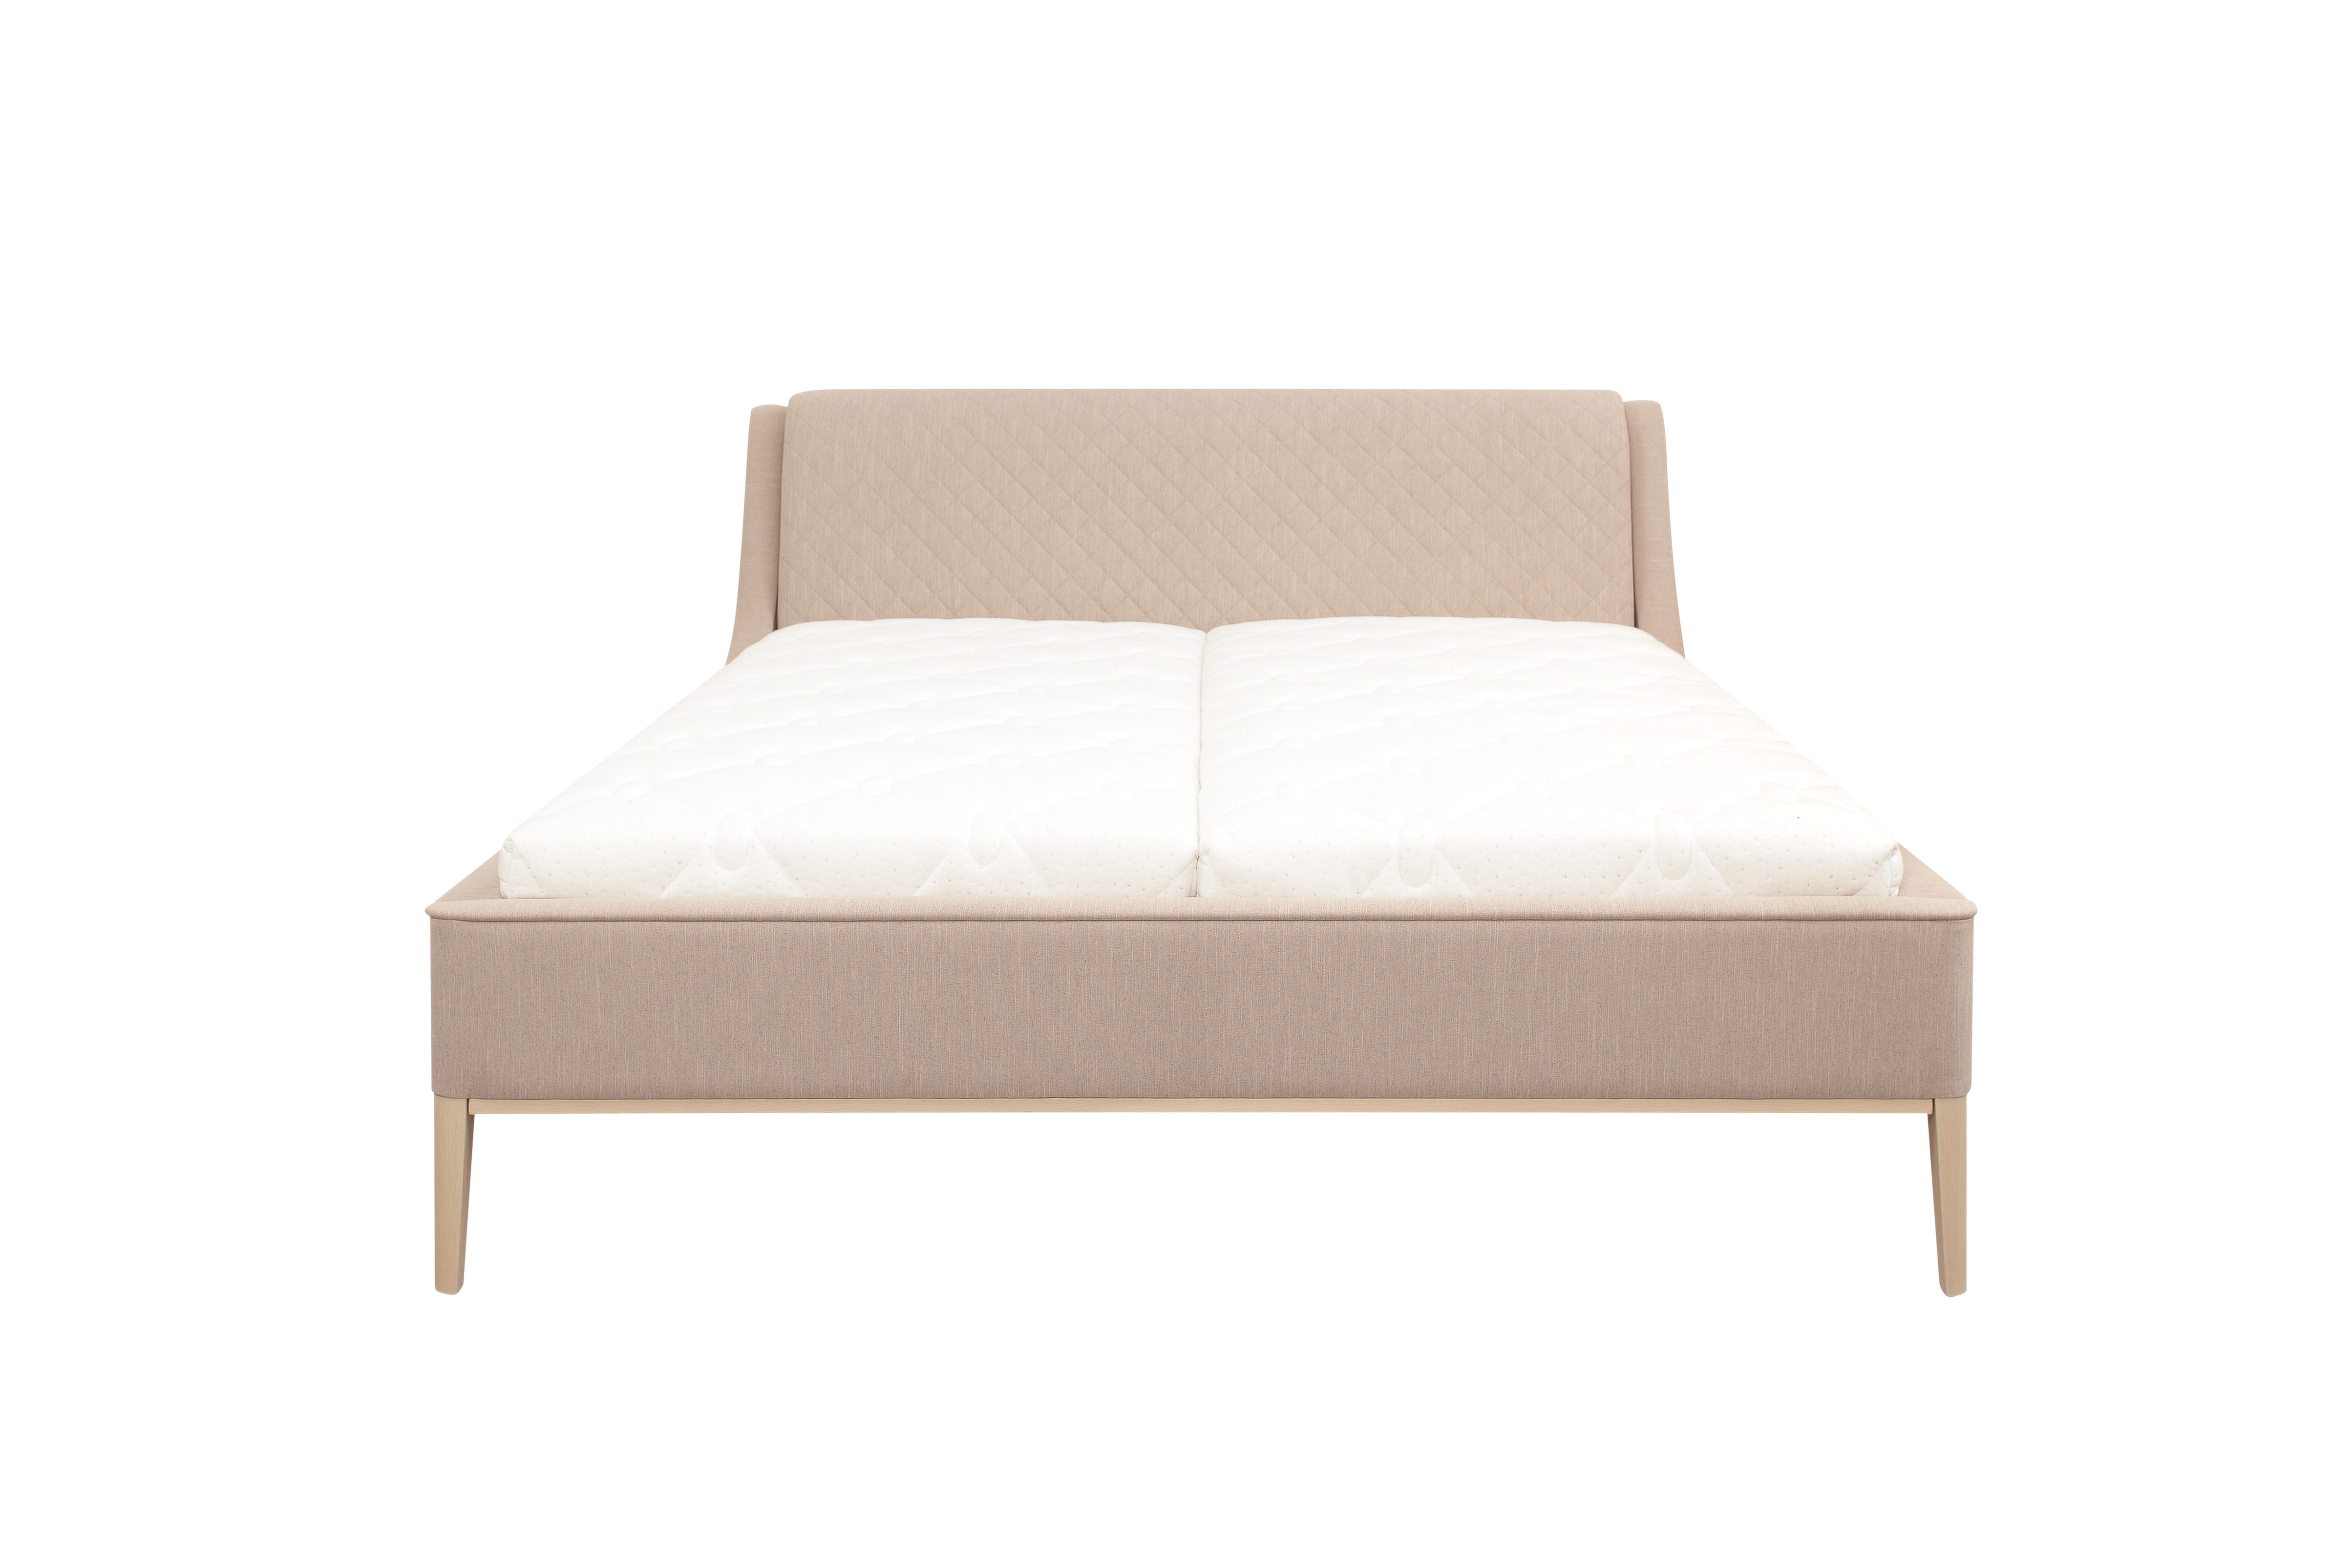 Essence Caro bed 160 or 180